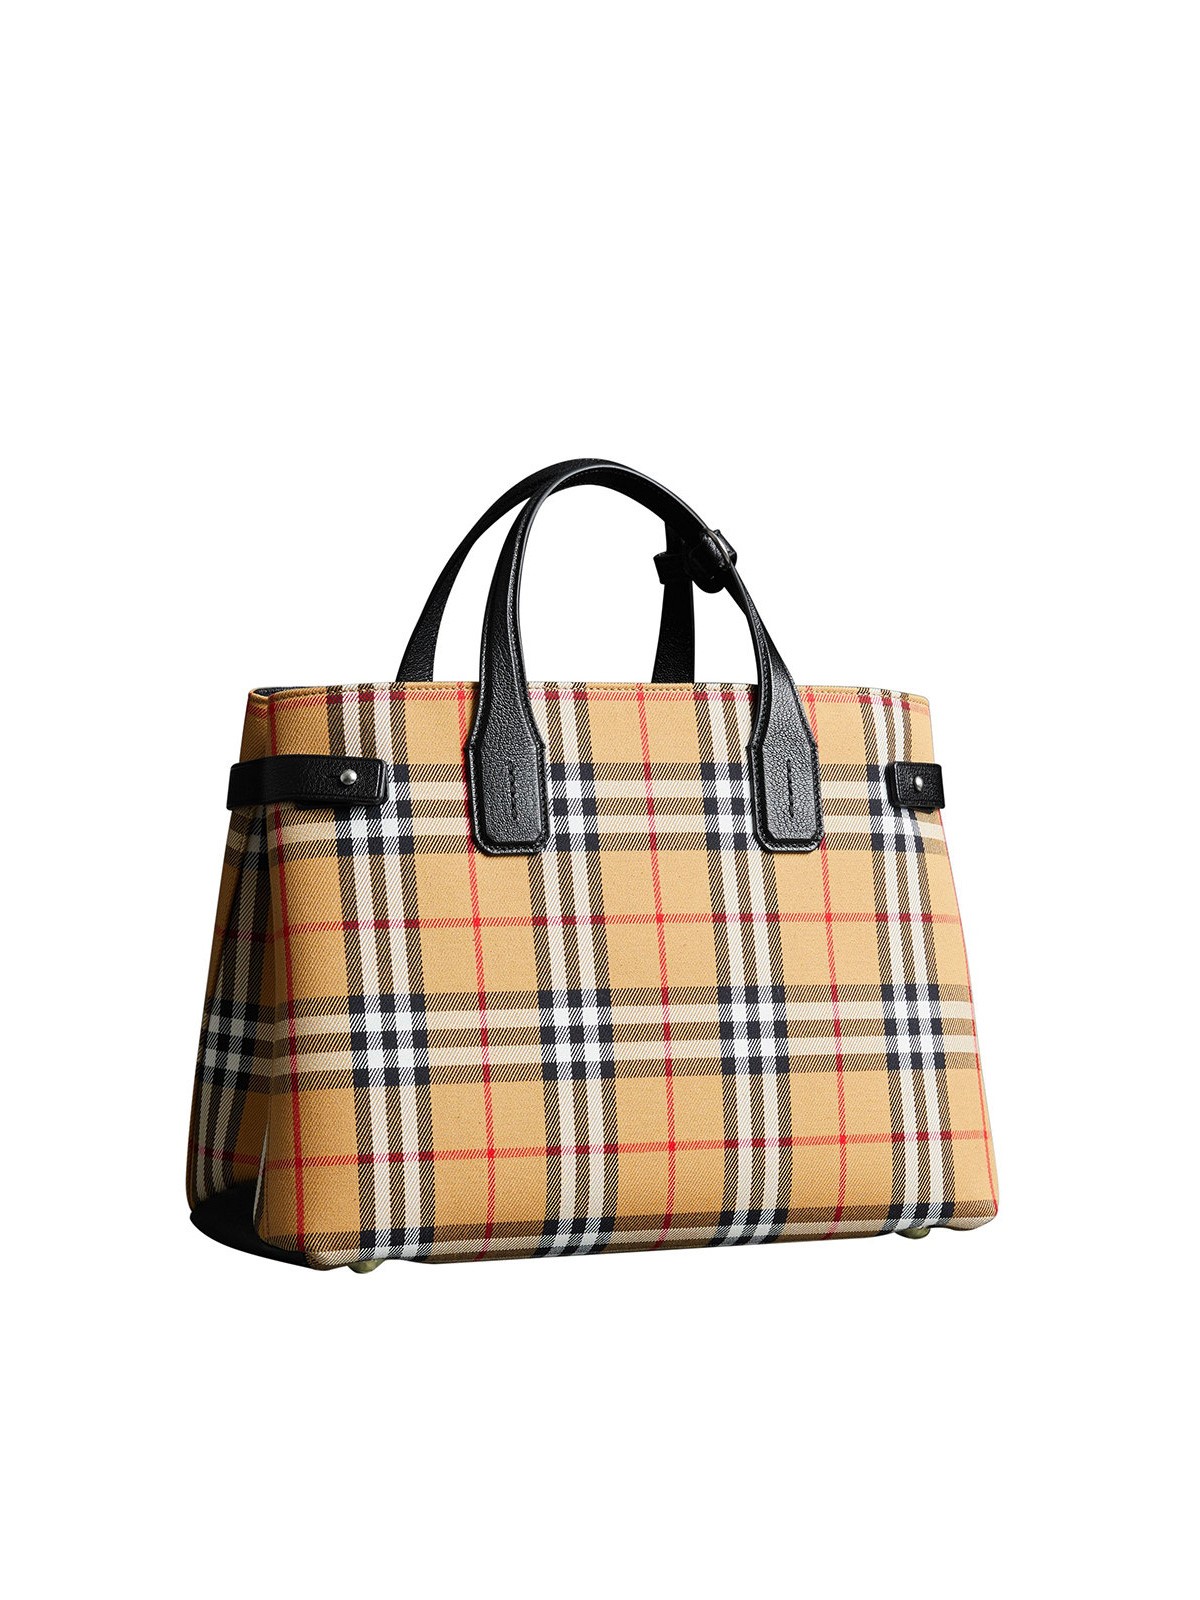 burberry MEDIUM BANNER BAG available on montiboutique.com - 23352